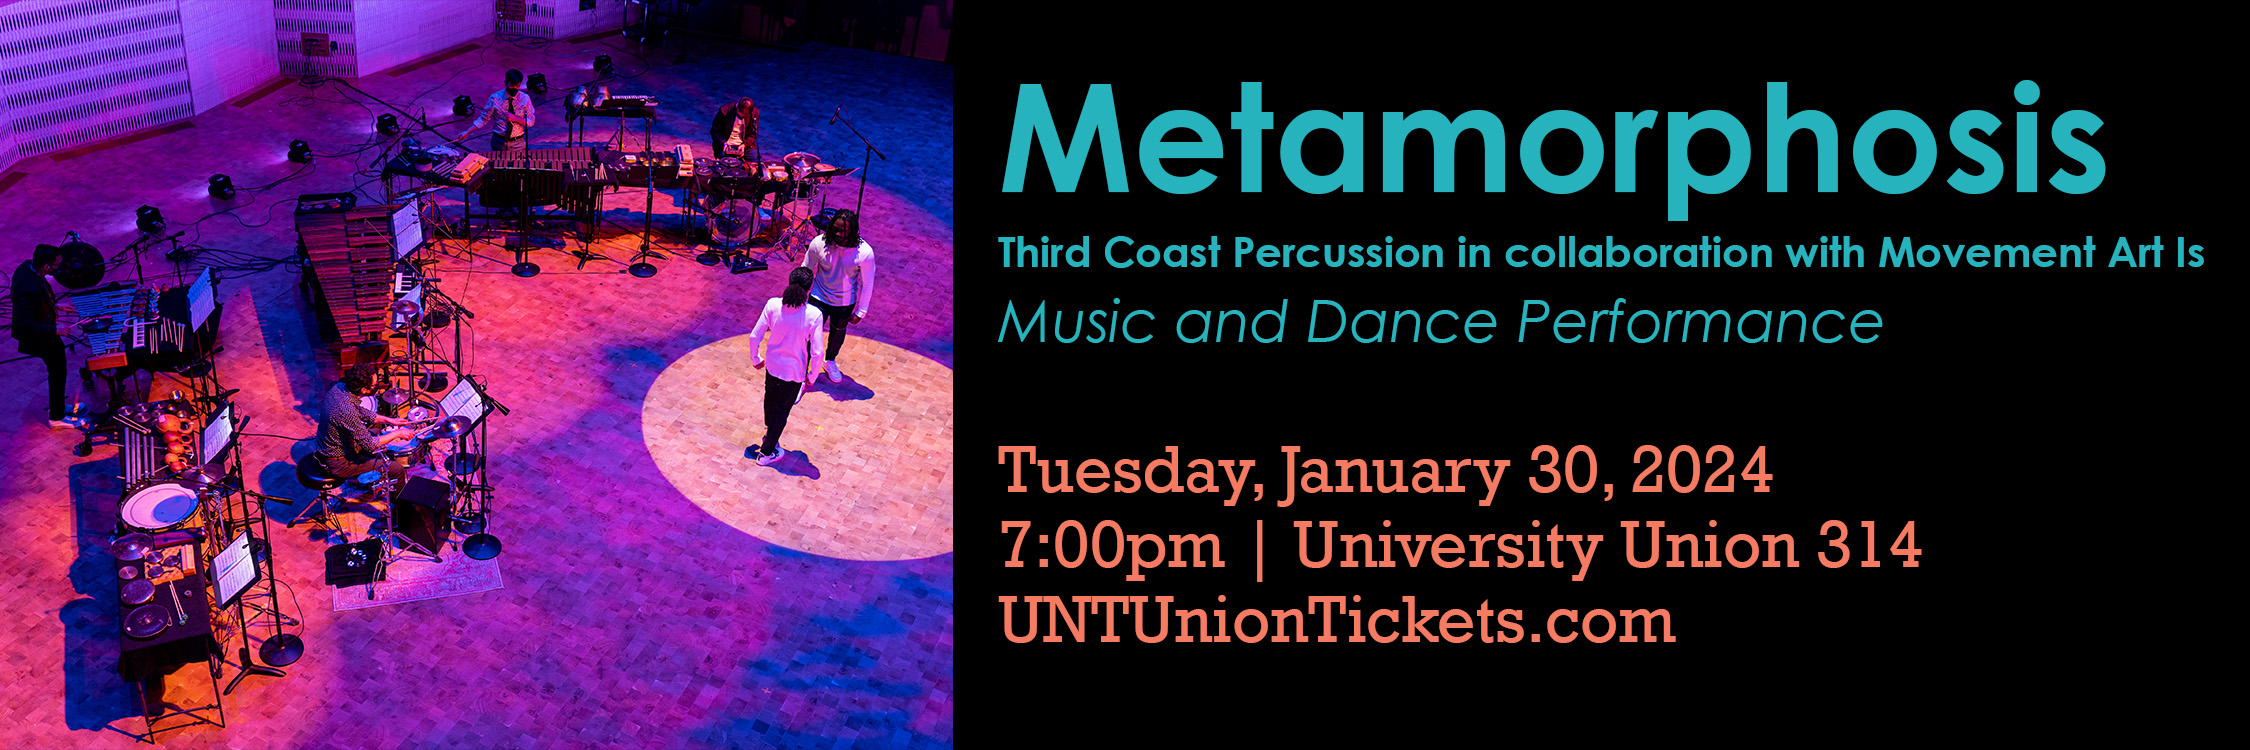 image of percussion group with dancers on stage and event information for metamorphosis